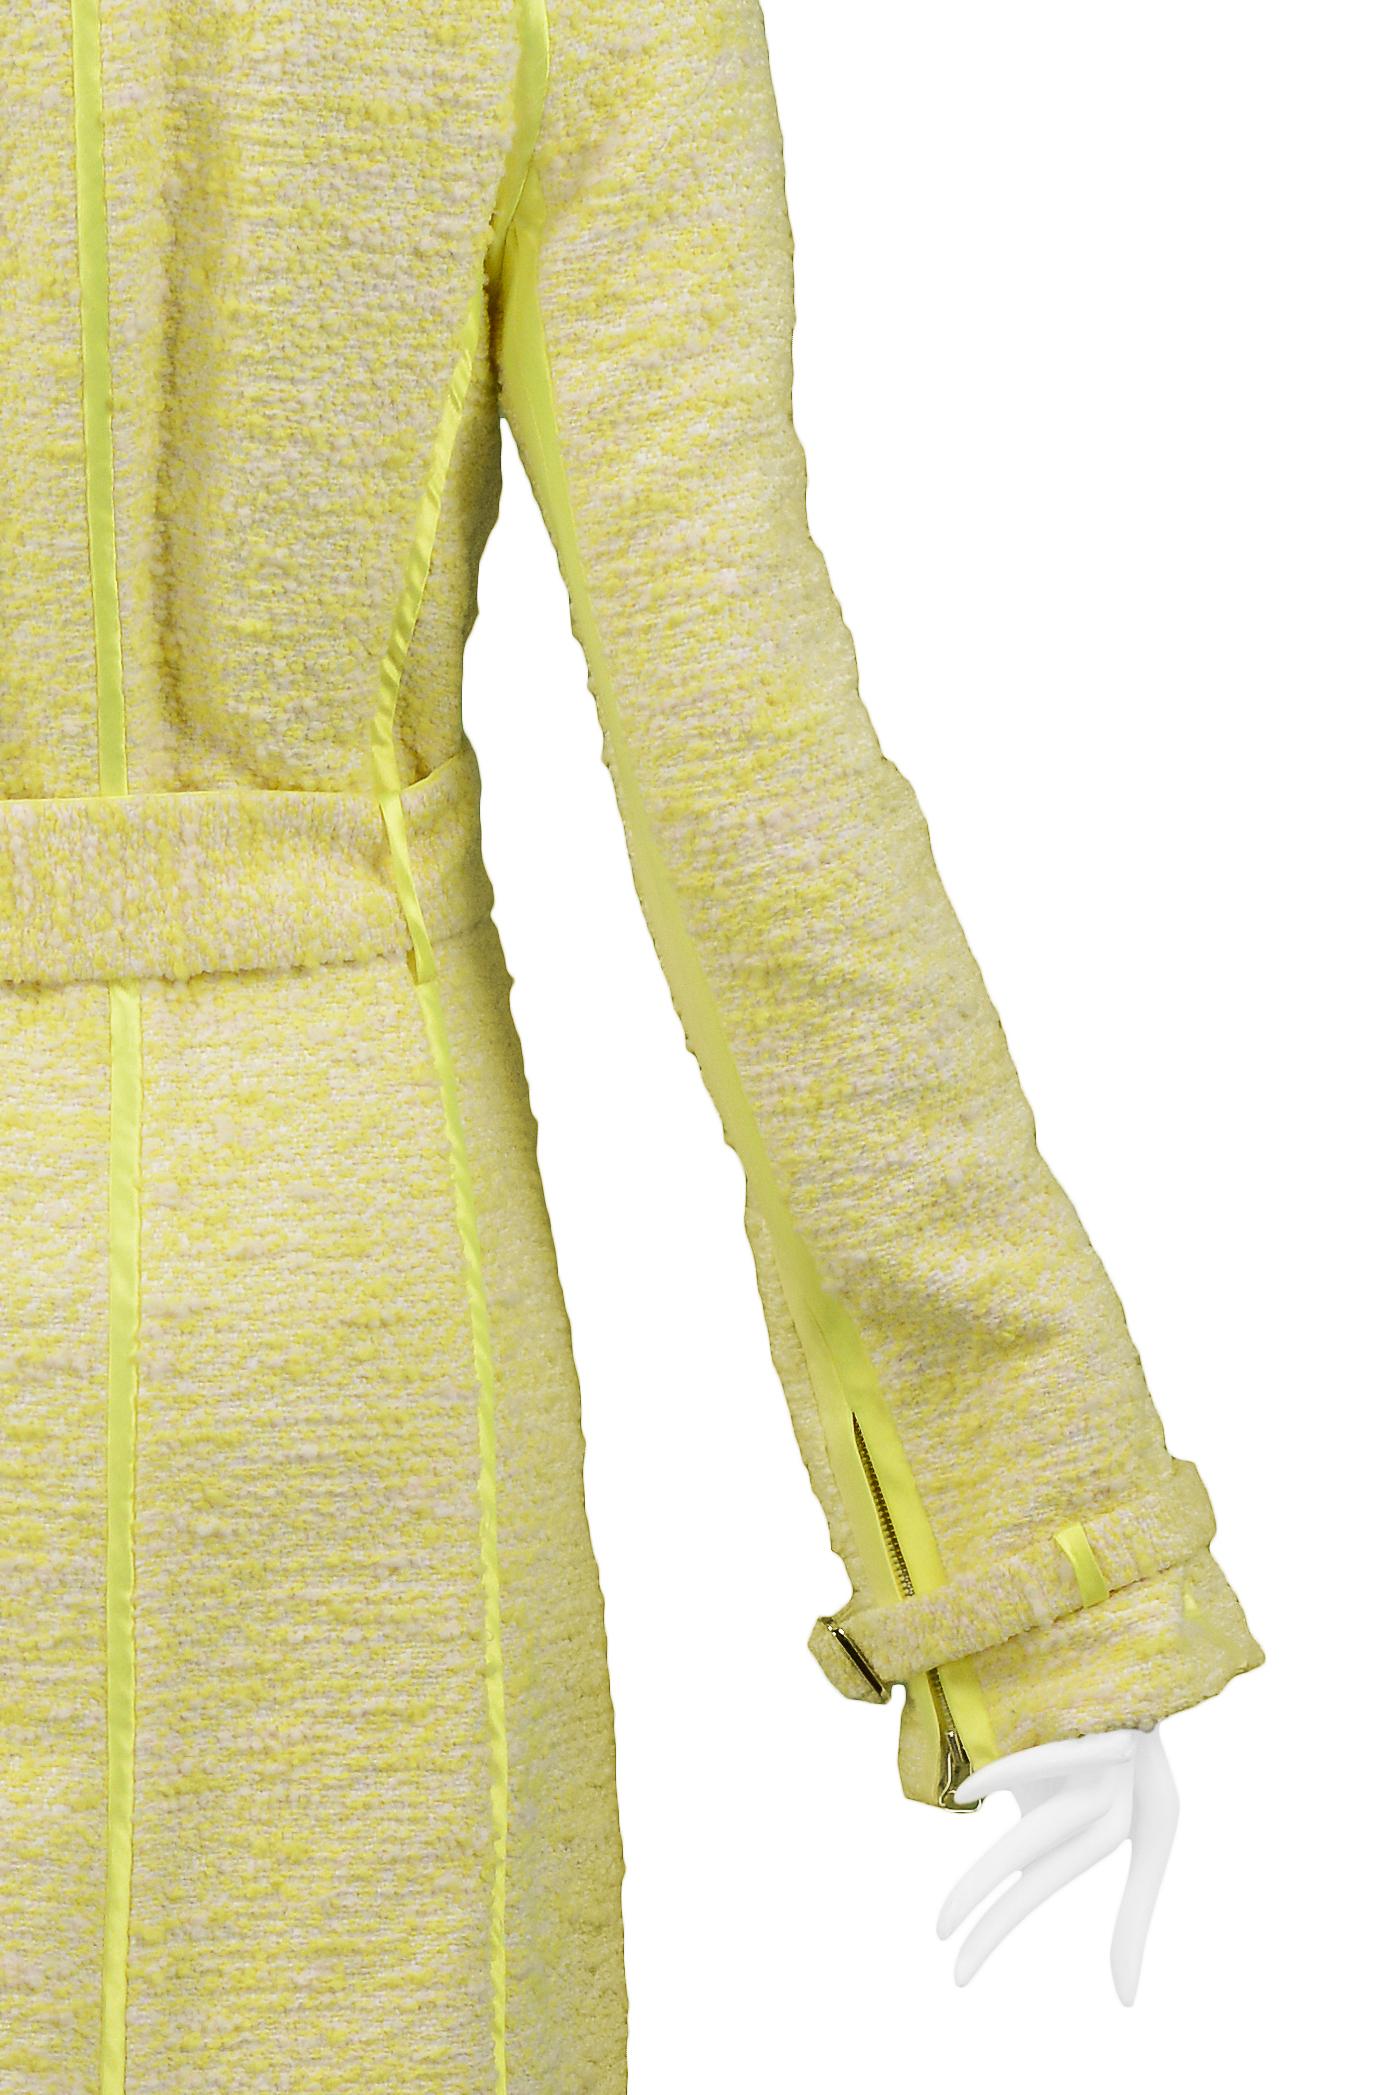 Women's Gianfranco Ferre Citron Yellow Boucle Belted Coat 2004 For Sale